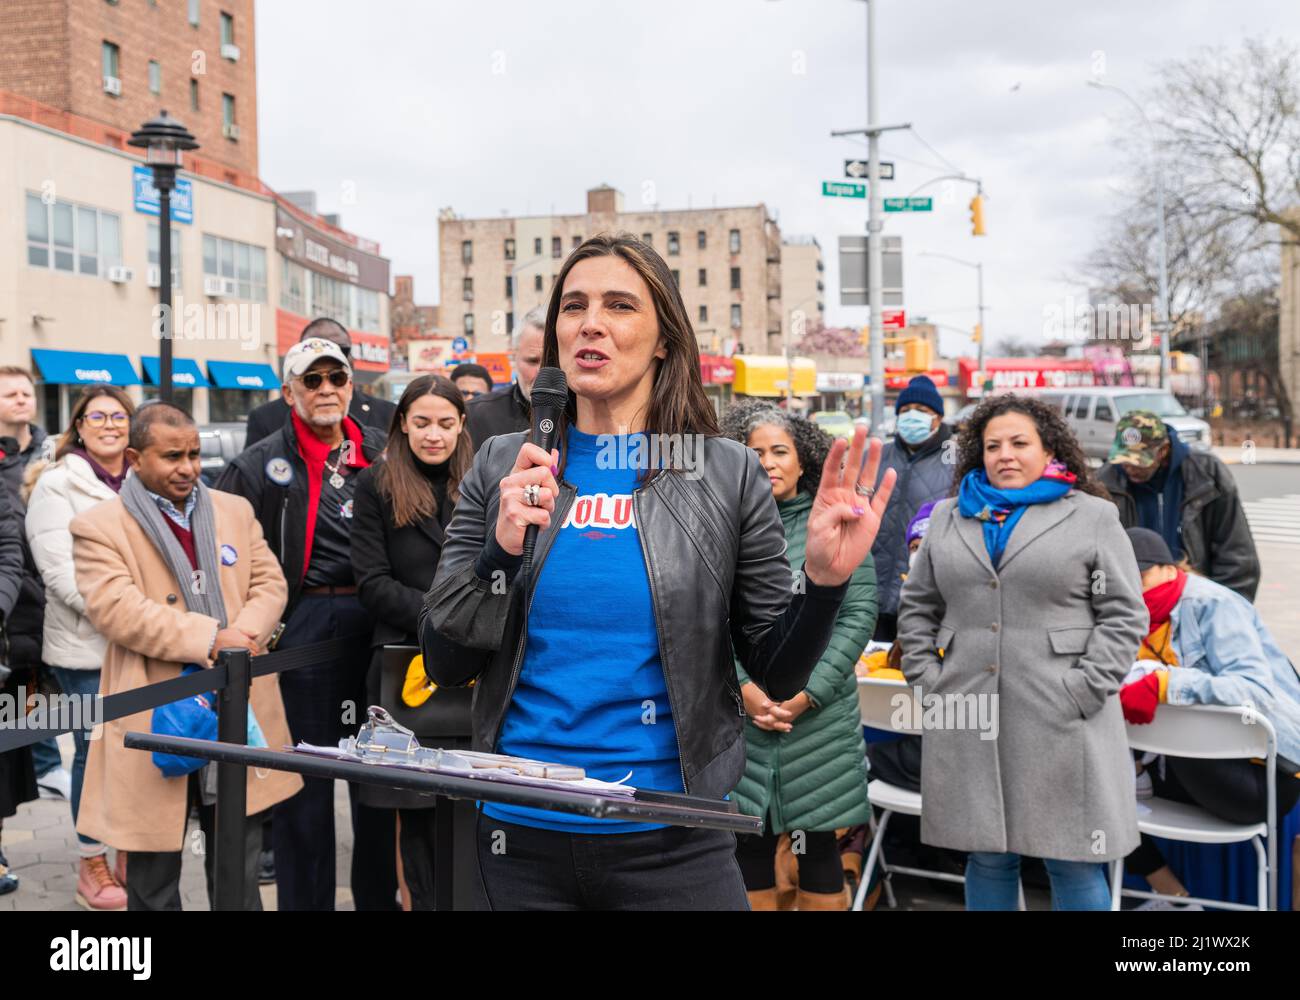 Bronx, USA. 27th Mar, 2022. Anna Marhta Visky National Organizer with Our Revolution joined Representative Alexandria Ocasio-Cortez as she held a campaign rally in The Bronx, New York March 27, 2022. Ocasio-Cortez has until April 7th to collect at least 1,250 signatures from voters to put Ocasio-Cortez on the ballot for 2022. (Photo by Steve Sanchez/Sipa USA) Credit: Sipa USA/Alamy Live News Stock Photo